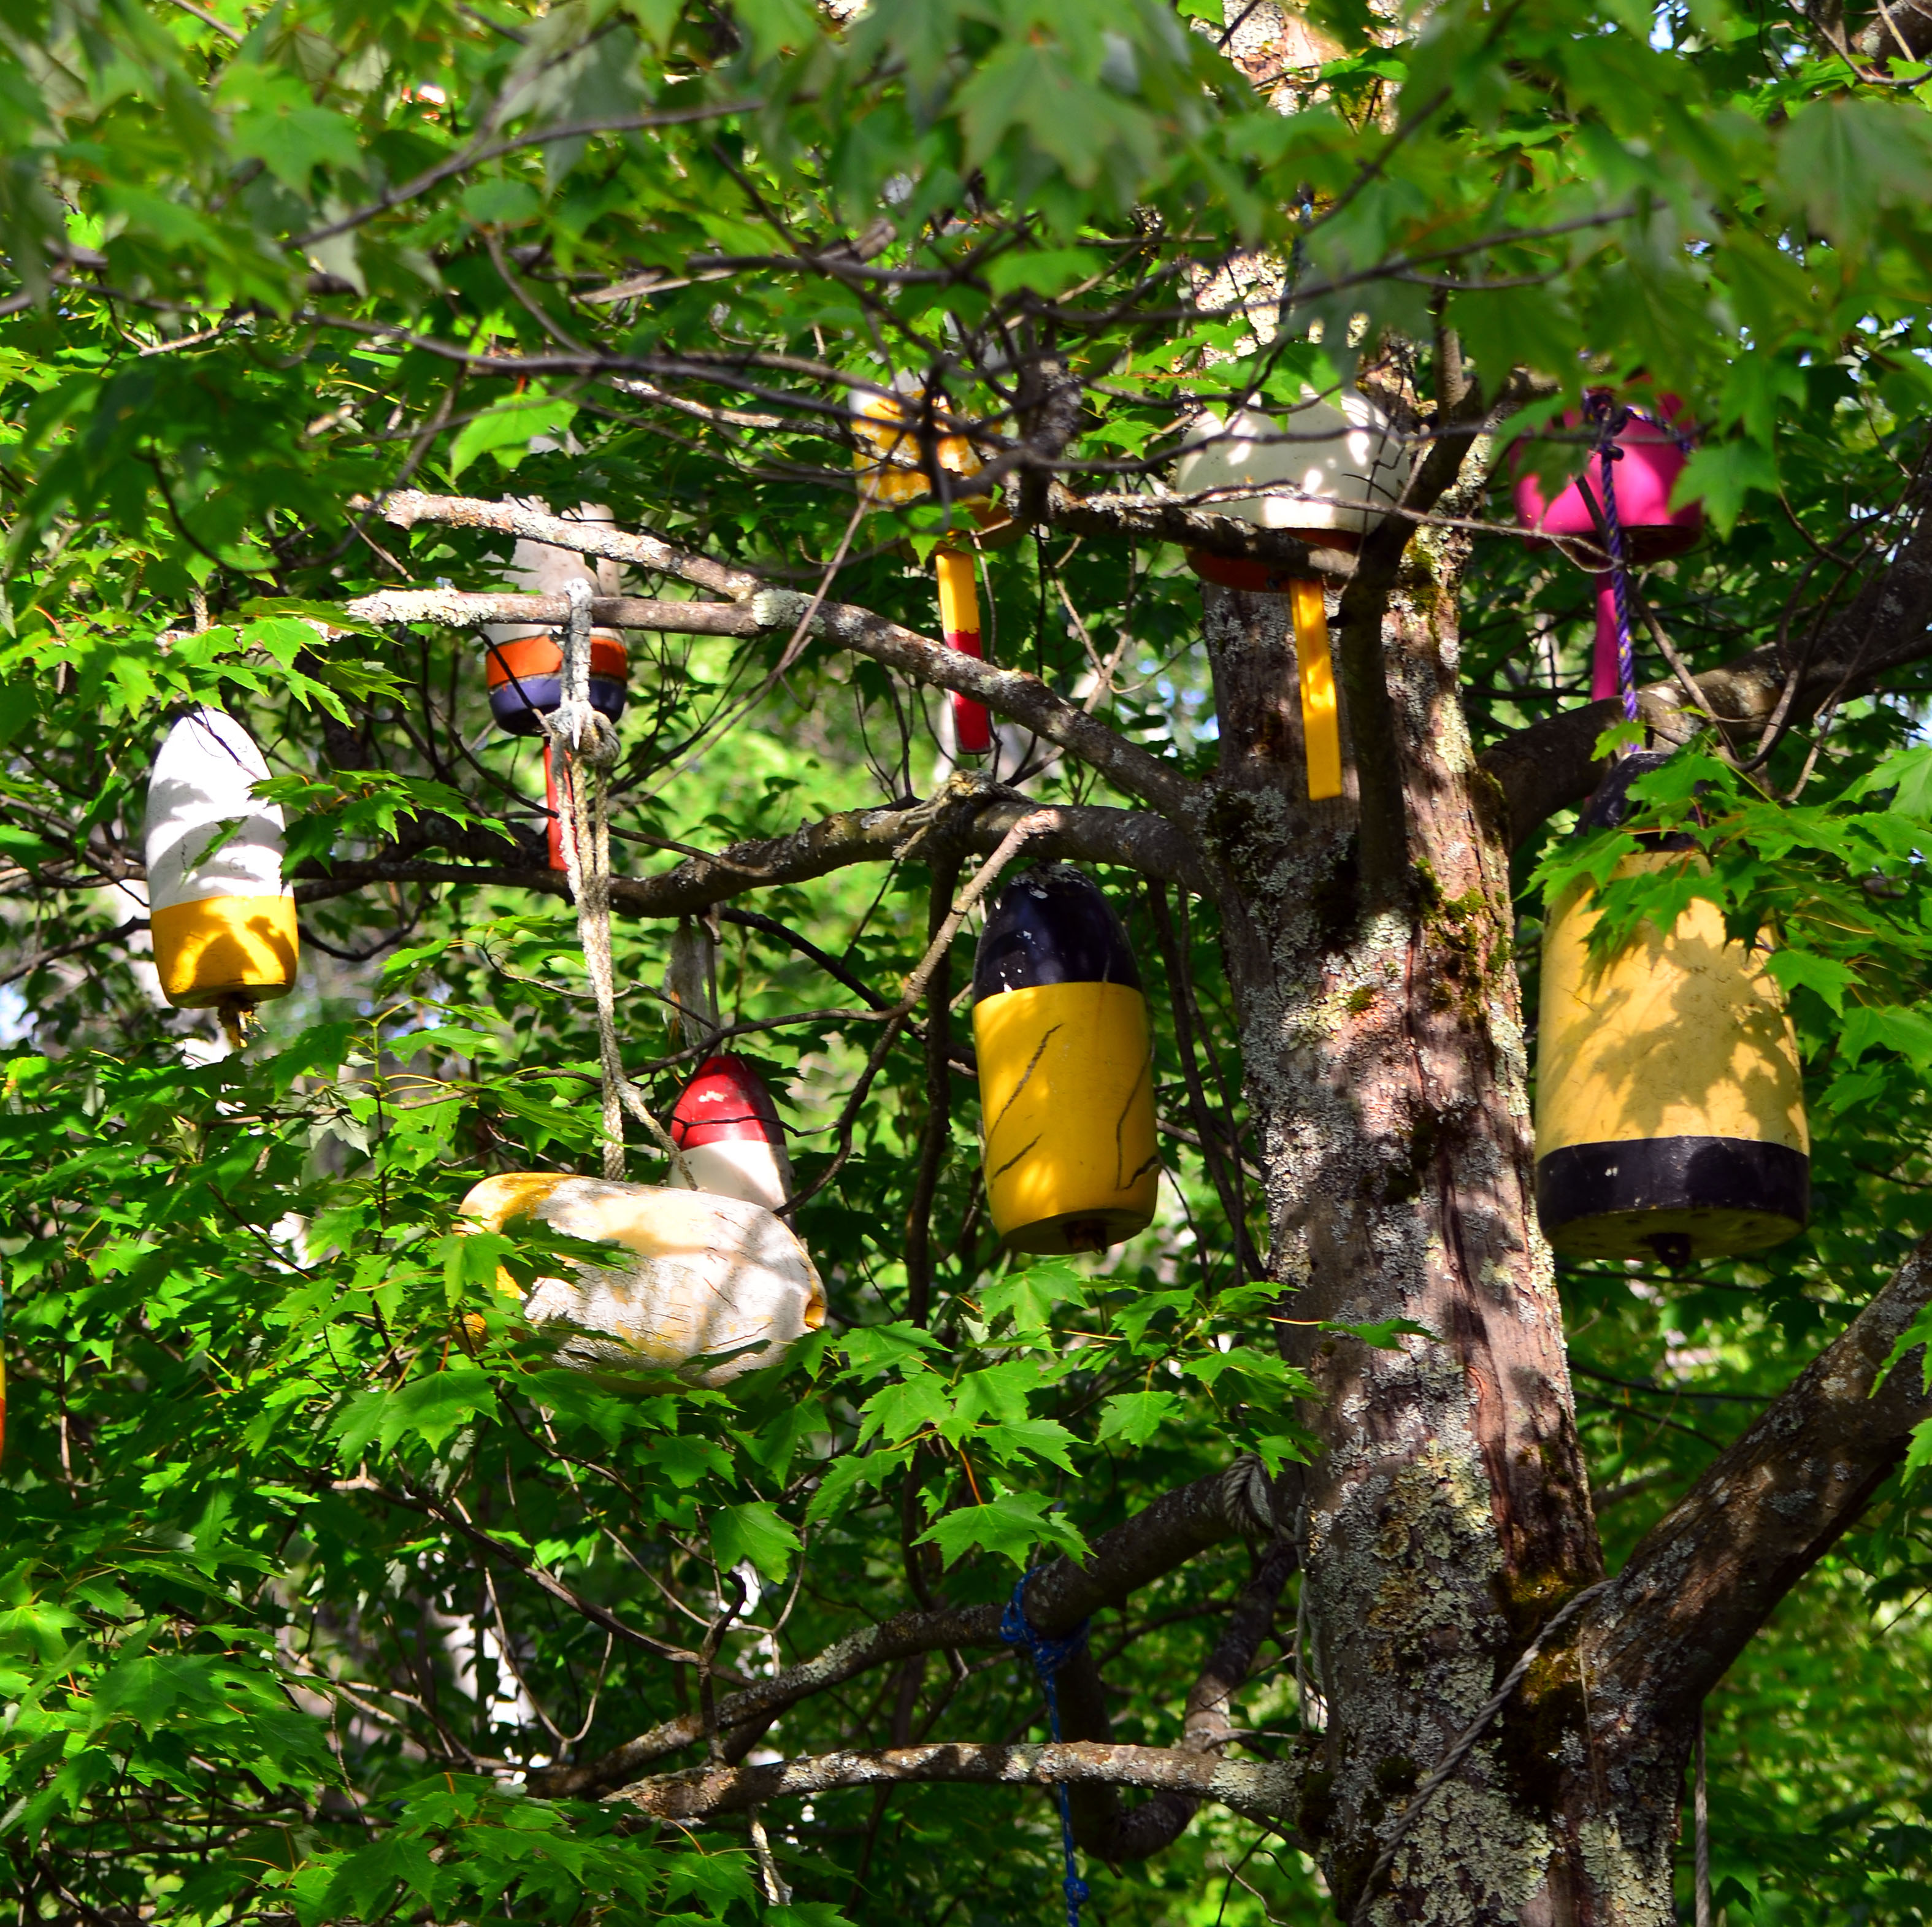 bouys in trees vermont  all rights reserved Ernest J. Bordini, Ph.D.  Clinical Psychology Associates of North Central Florida